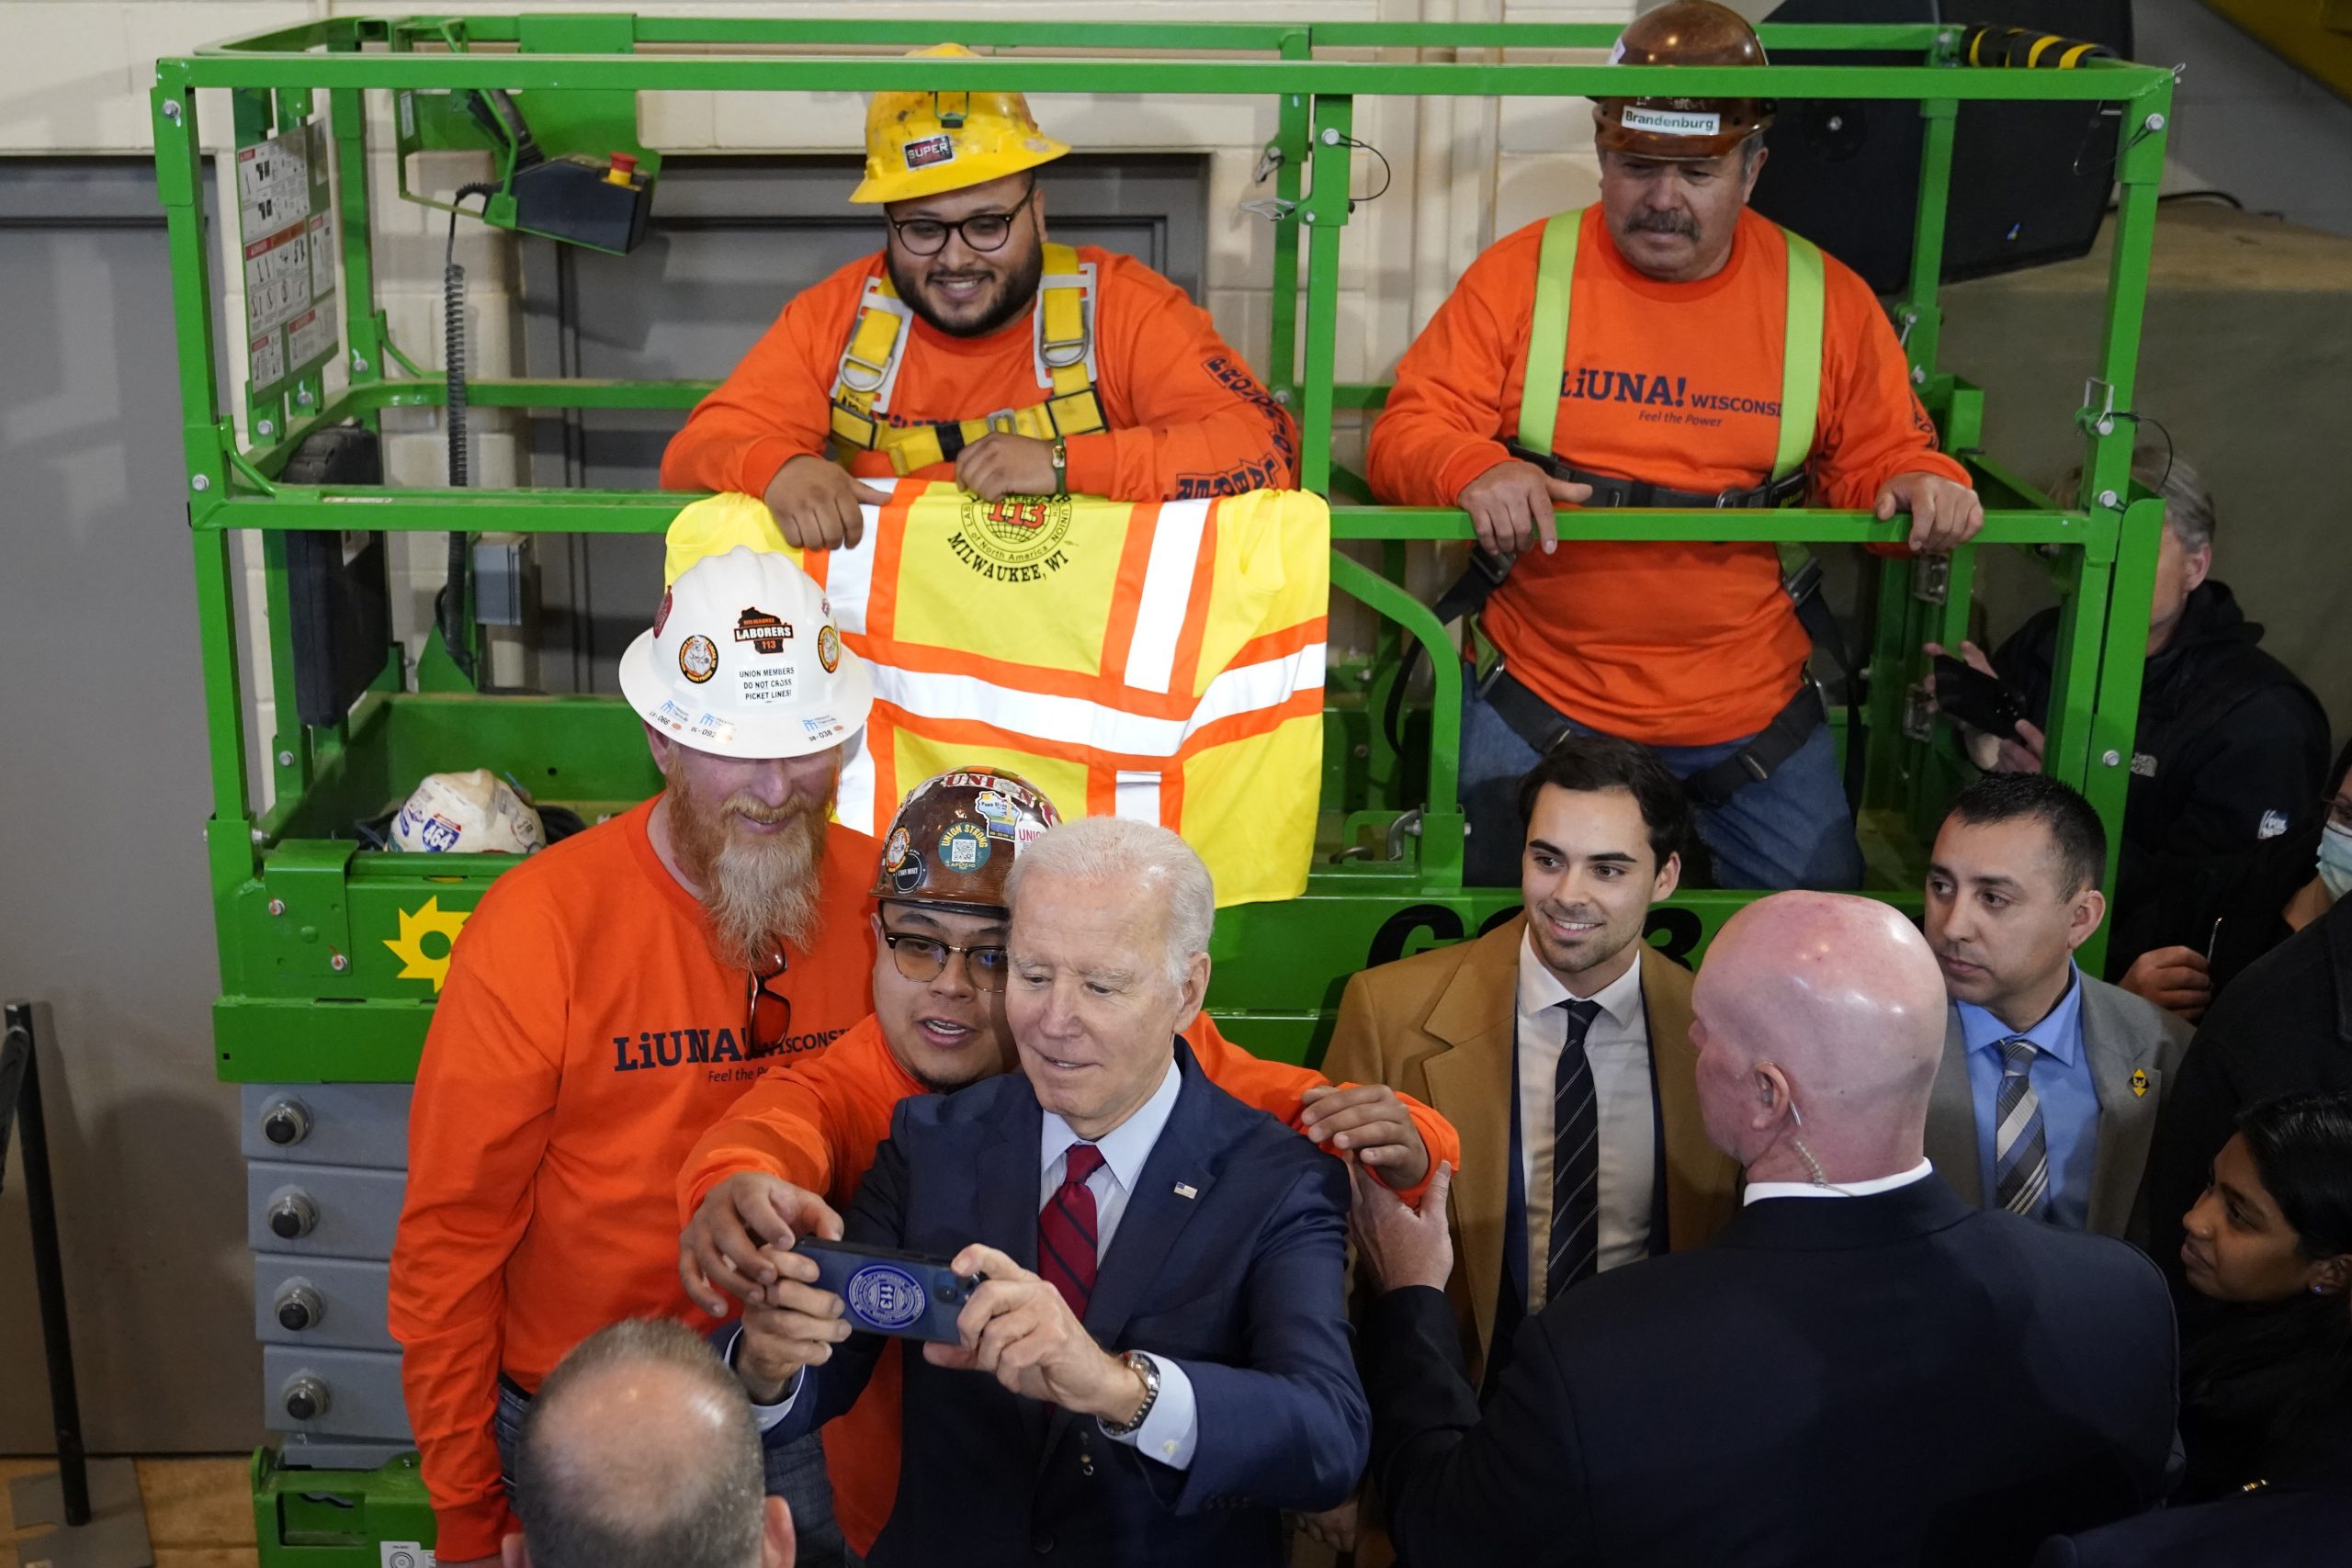 ‘We can’t find people to work’: The newest threat to Biden’s climate policies